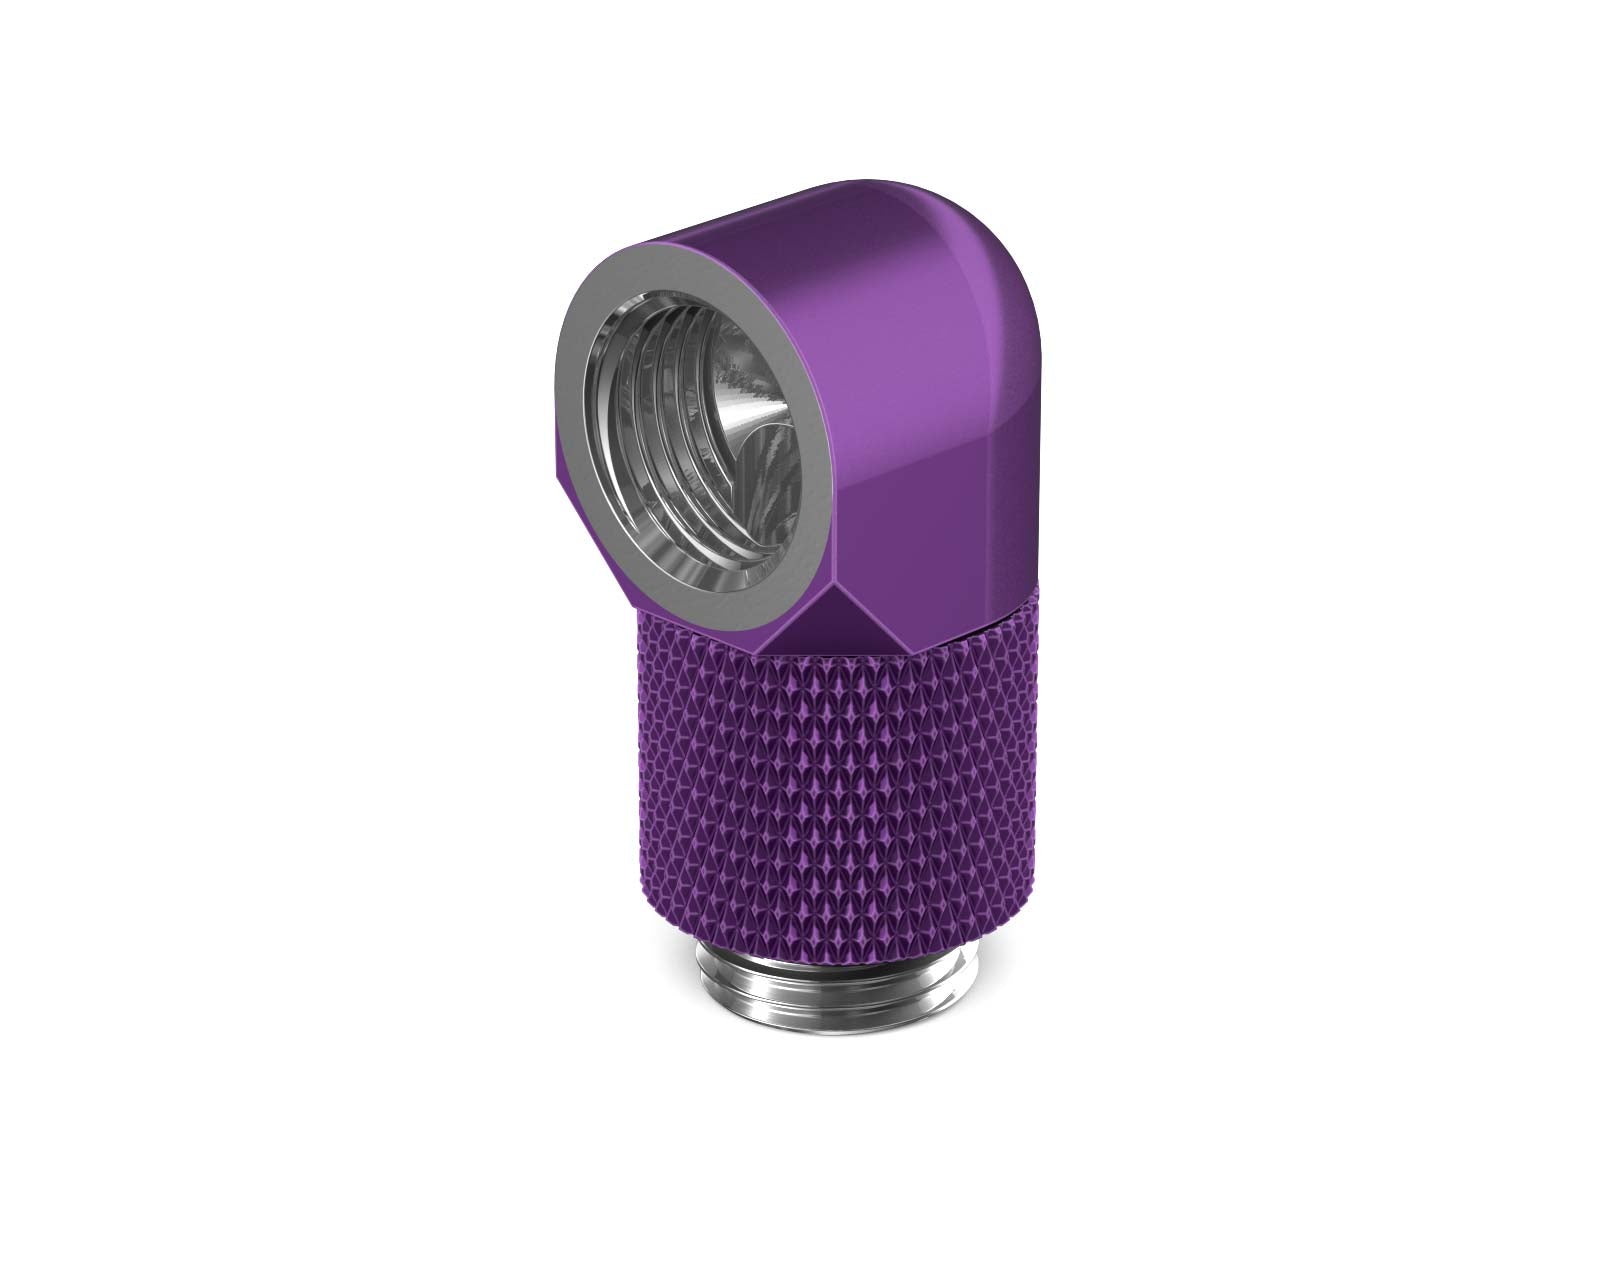 PrimoChill Male to Female G 1/4in. 90 Degree SX Rotary 15mm Extension Elbow Fitting - PrimoChill - KEEPING IT COOL Candy Purple